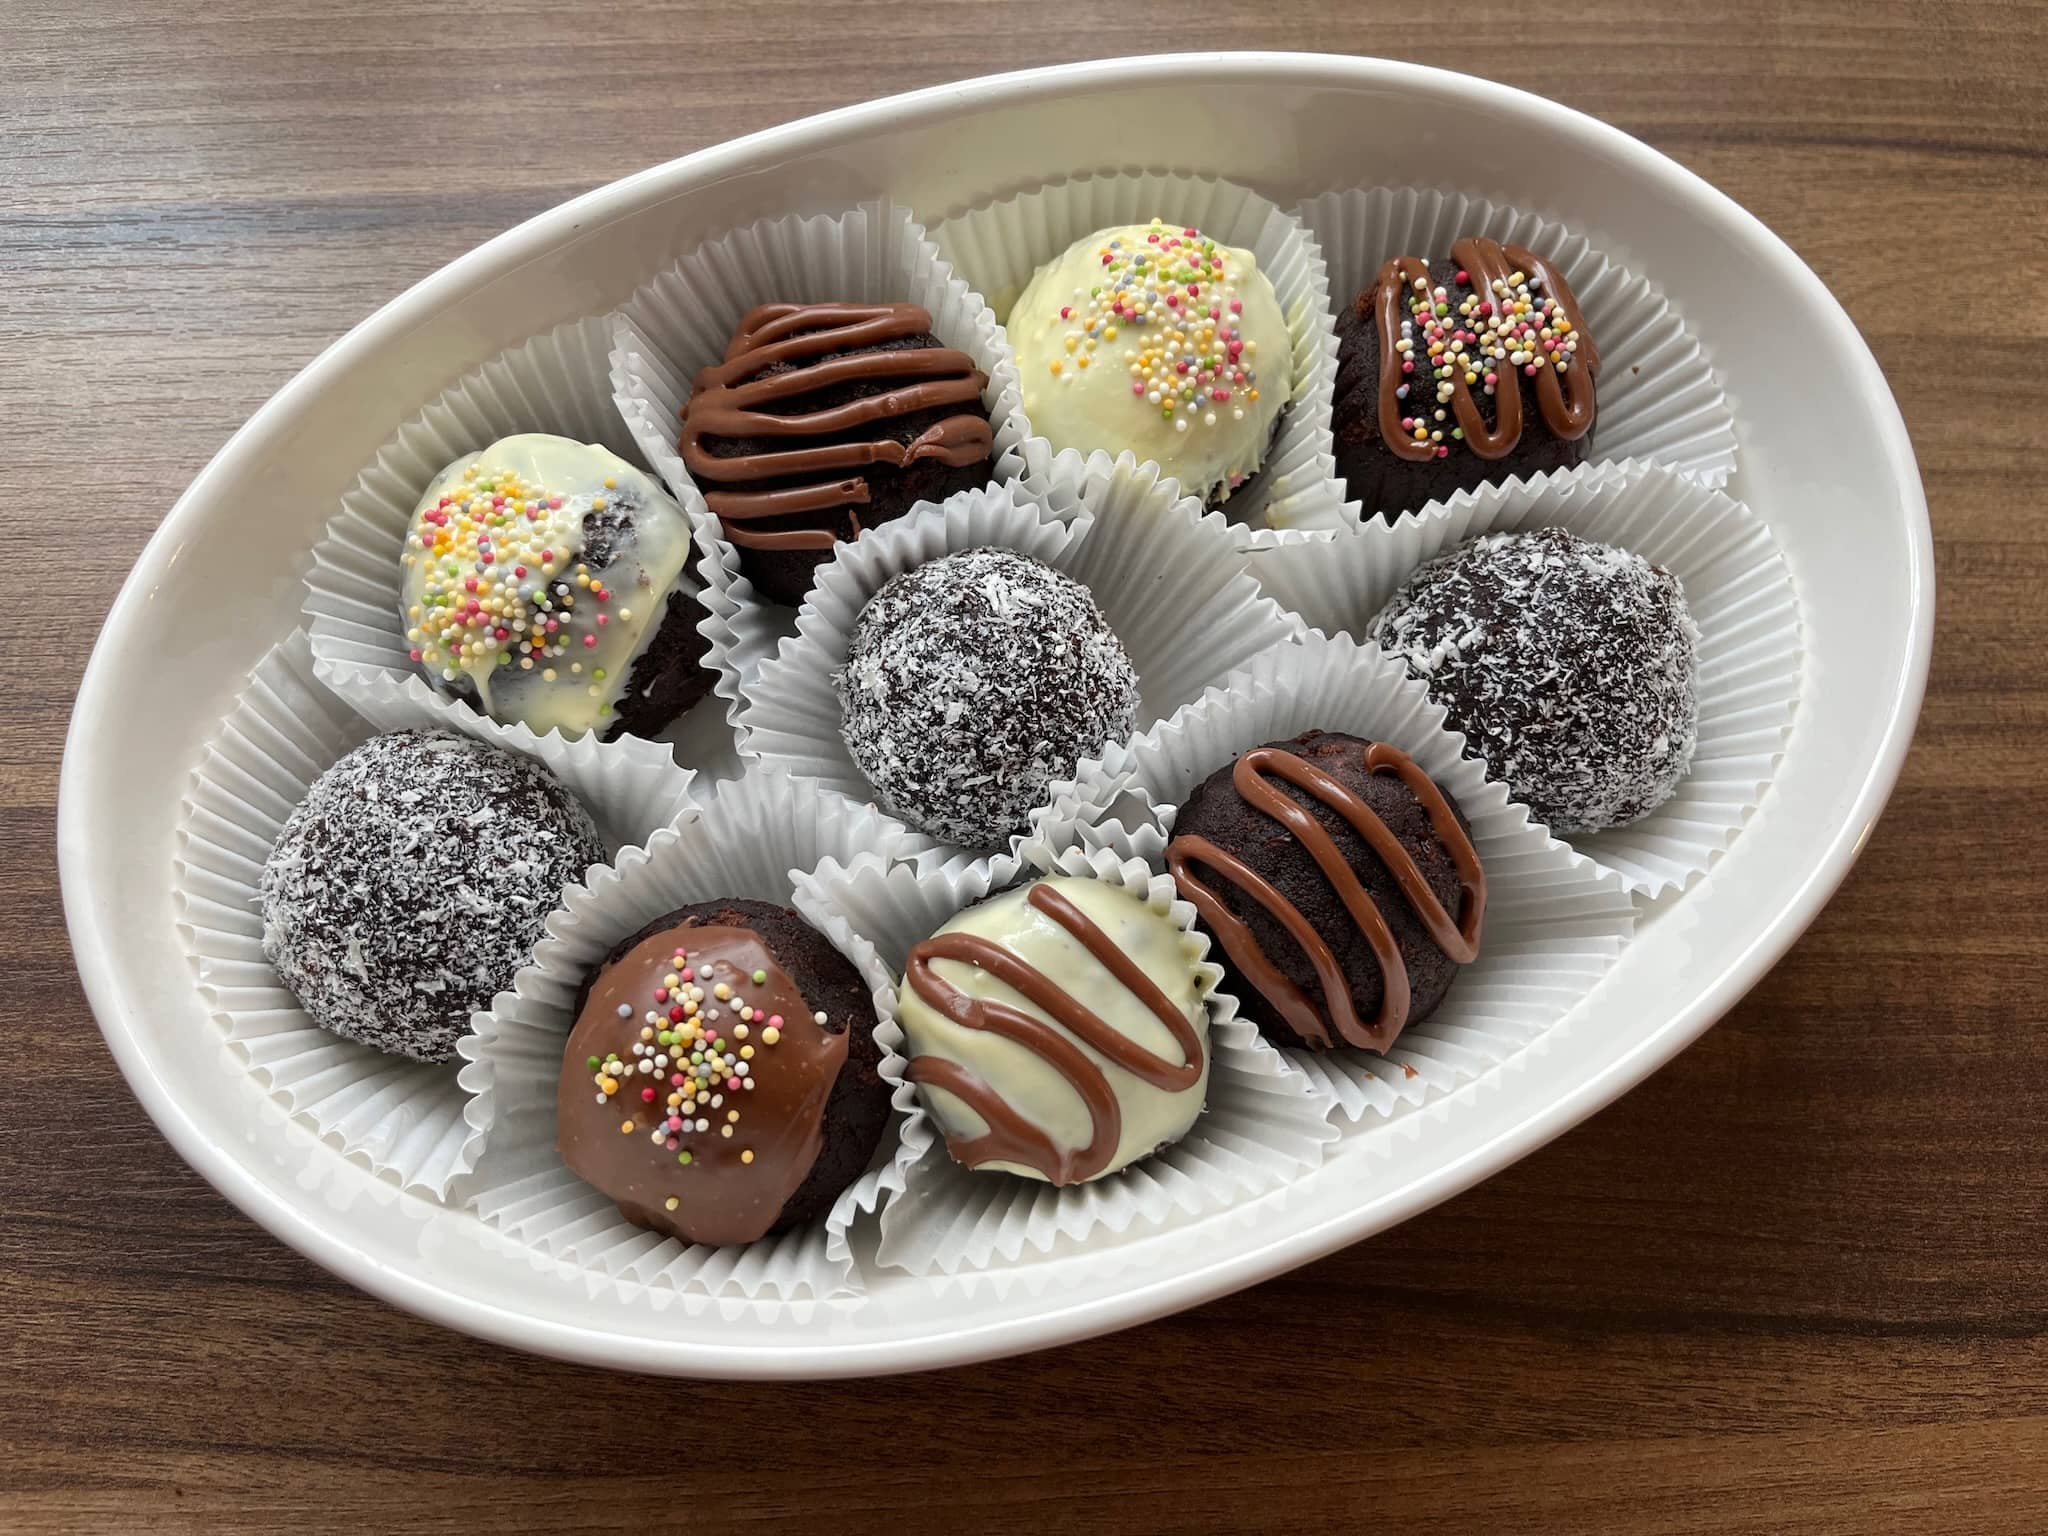 Decorated cake balls in muffin cases on a plate